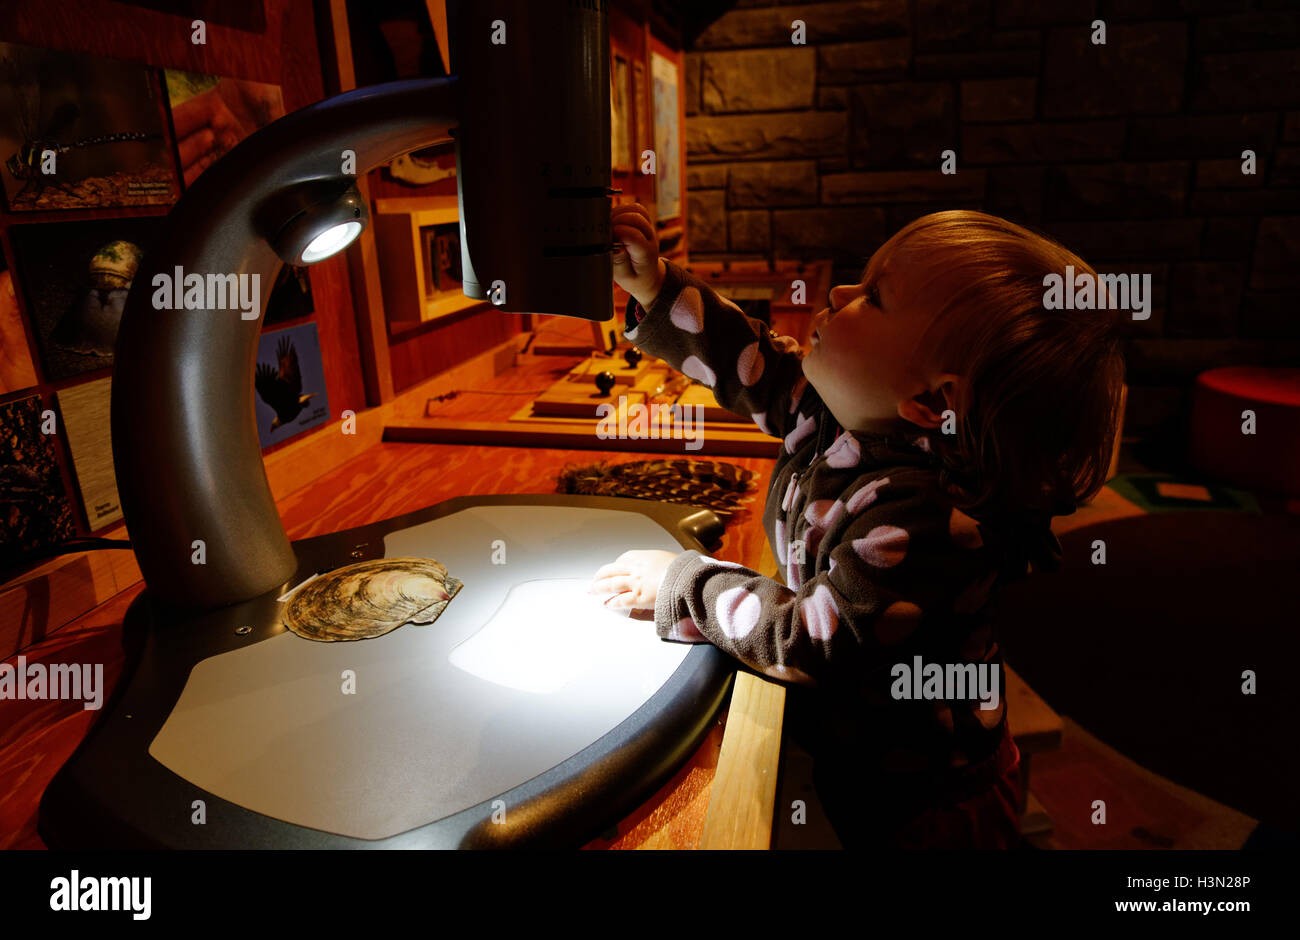 A little girl looking at the microscope interactive exhibit in Kouchibouguac NP visitors centre, New Brunswick Canada Stock Photo